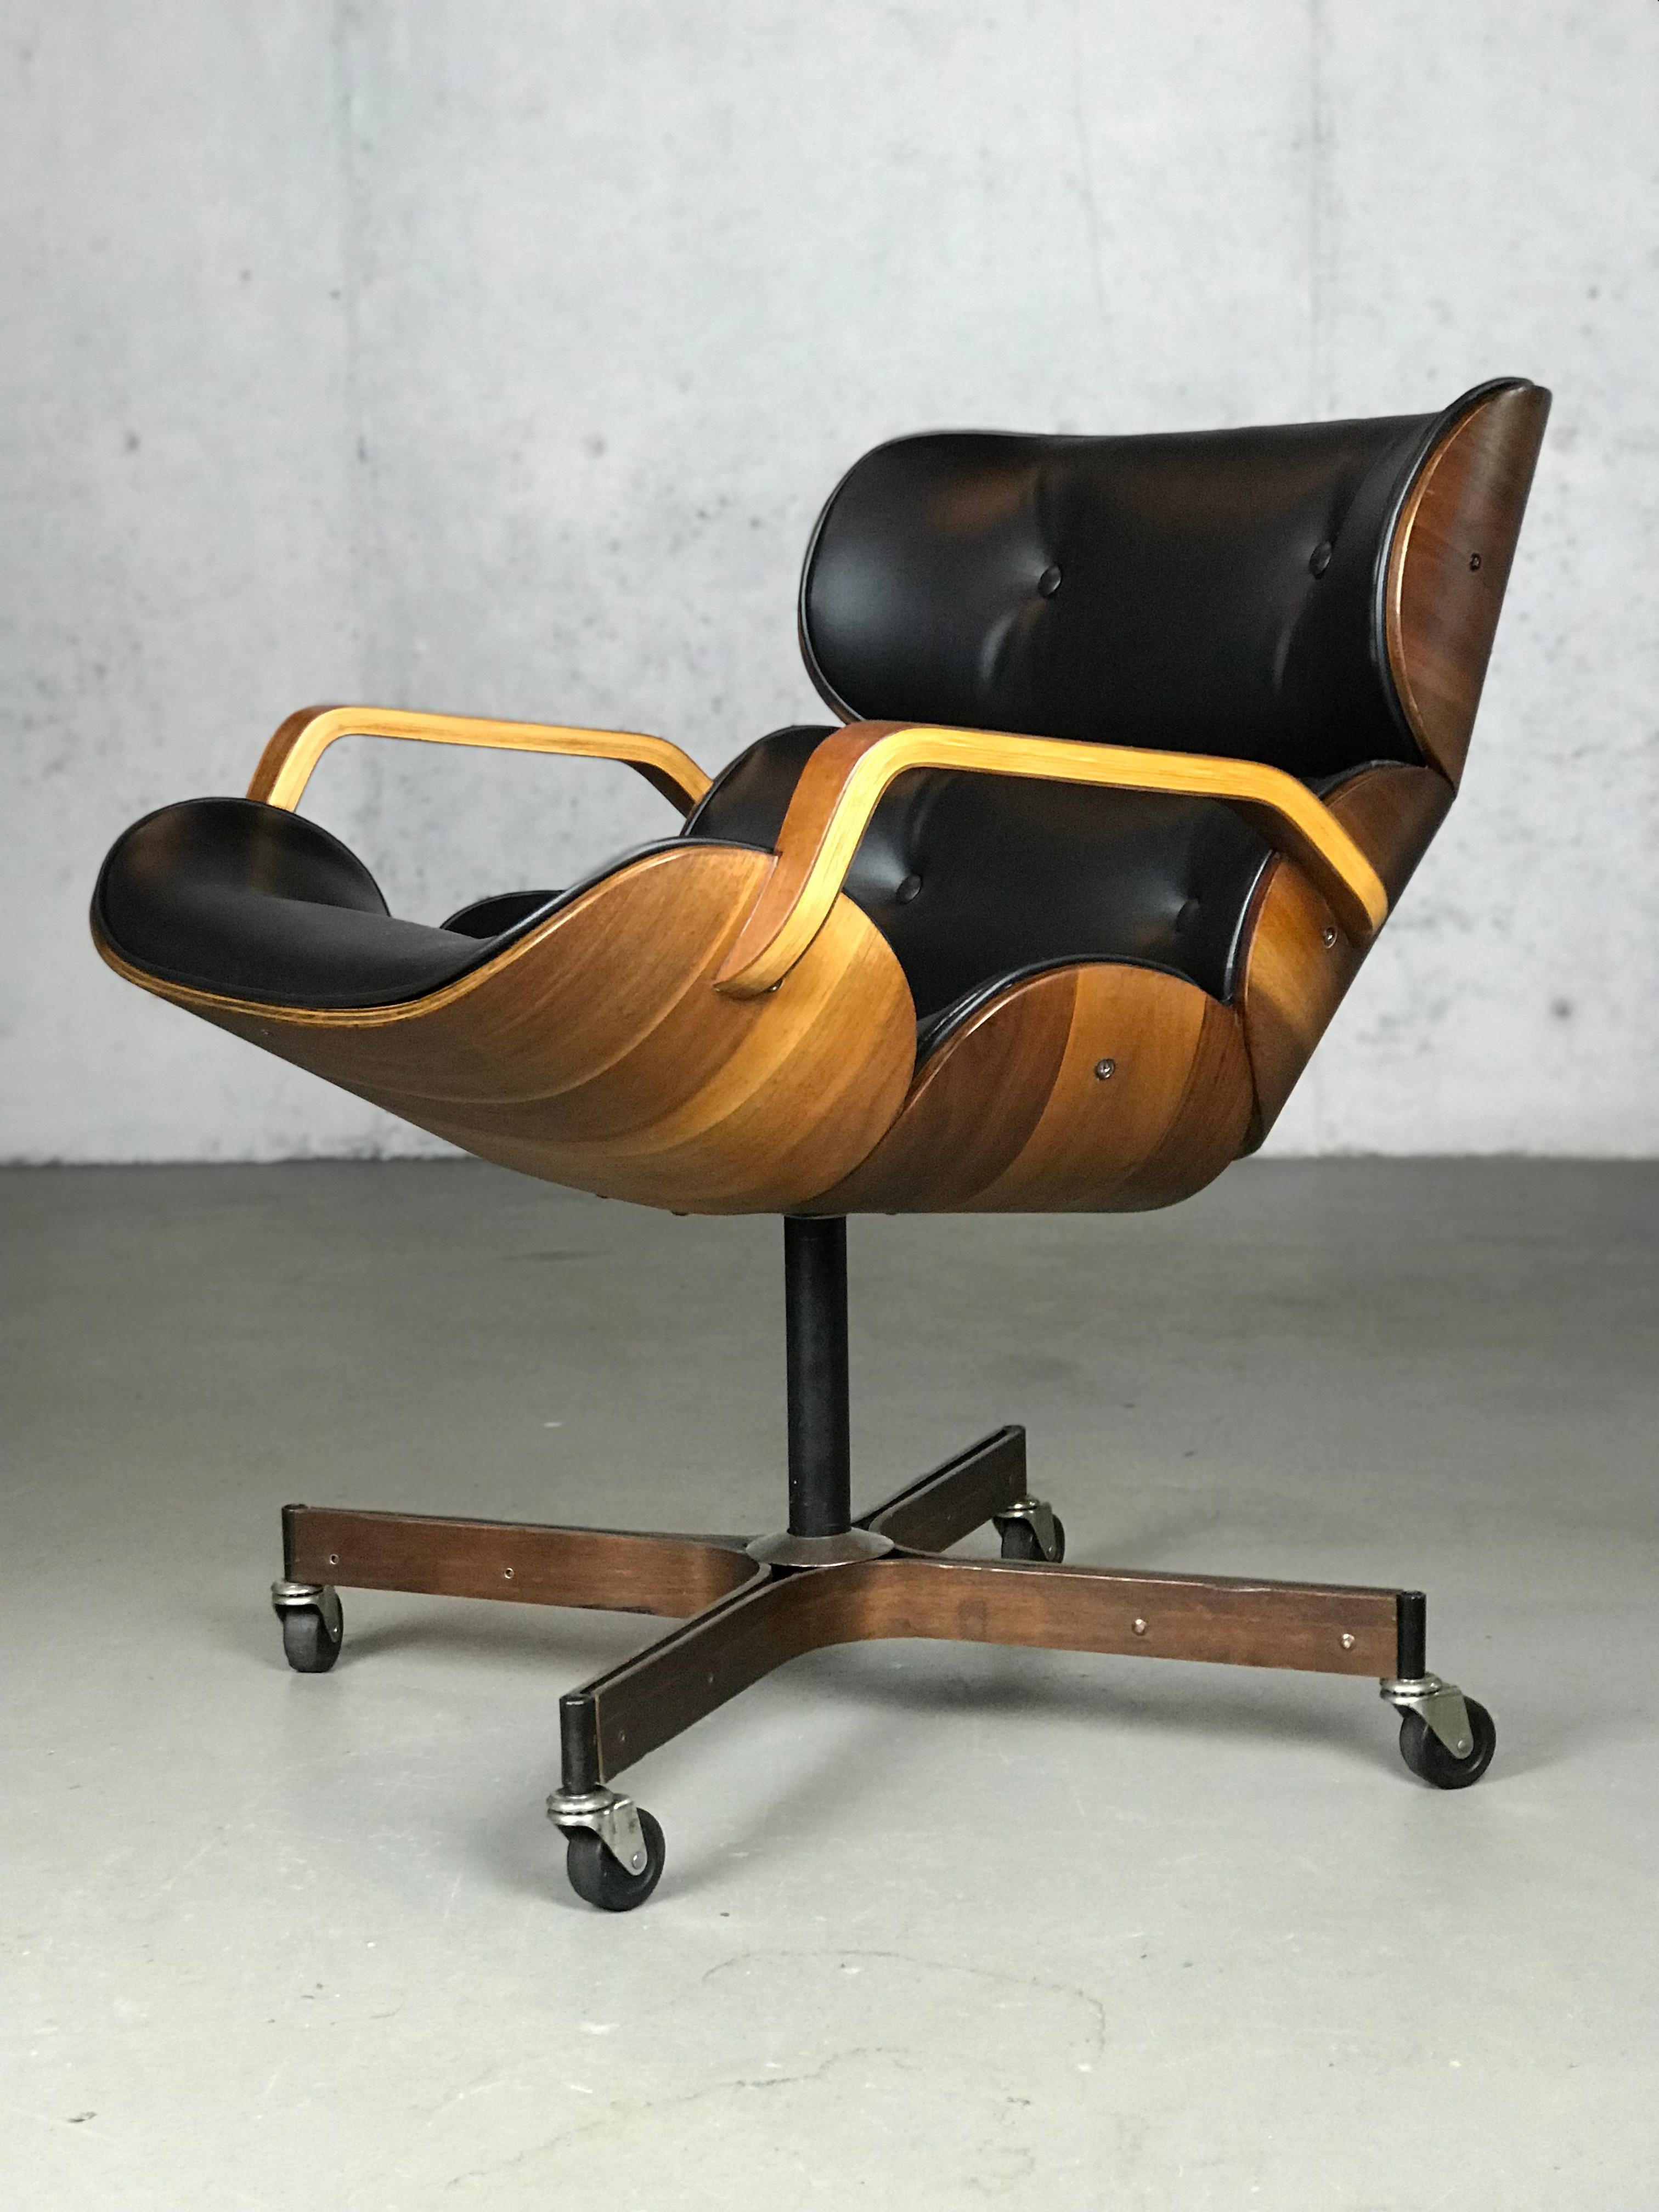 American Rolling Segmented Lounge or Desk Chair by George Mulhauser for Plycraft